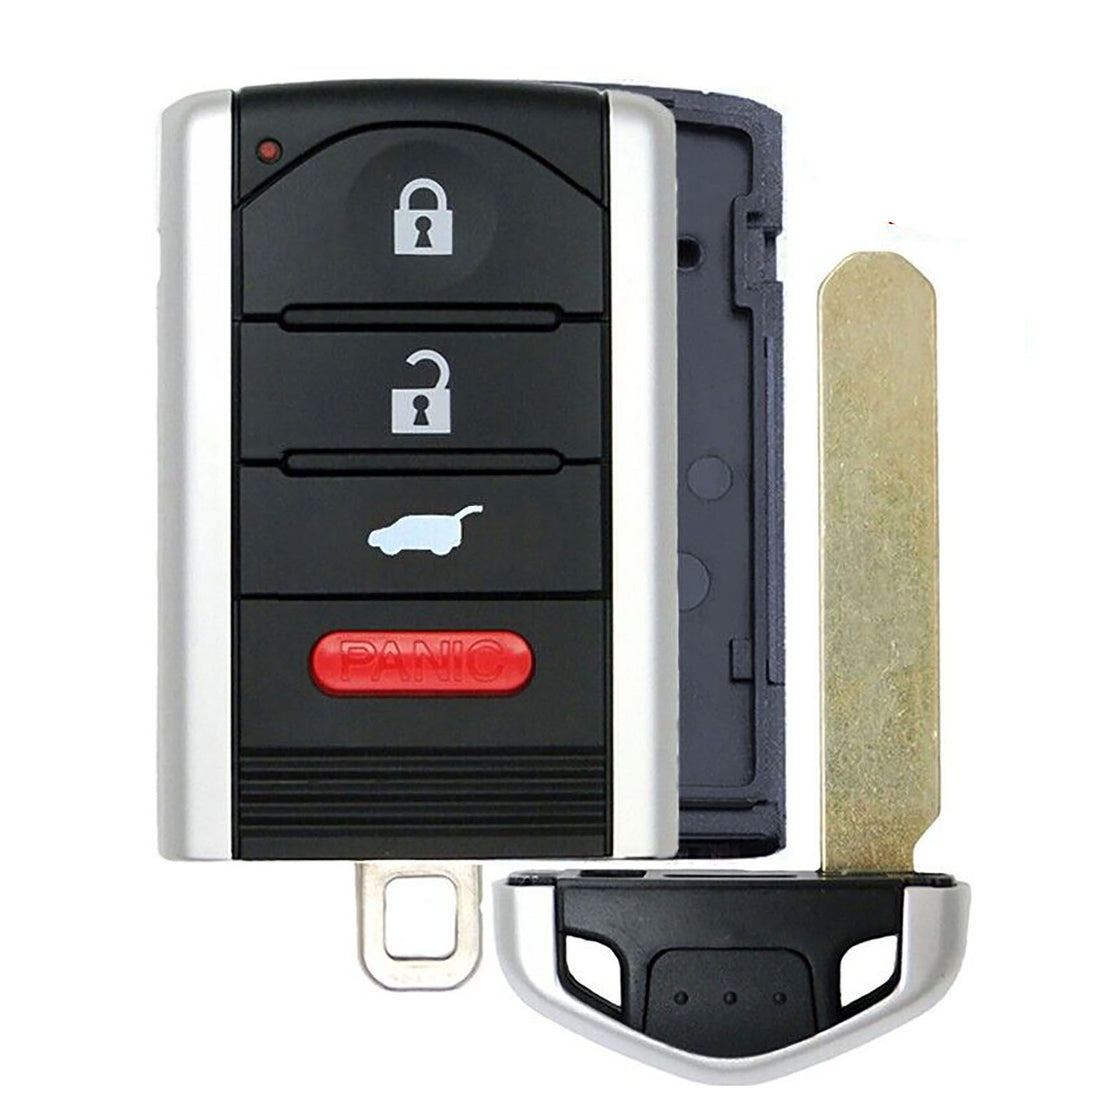 1x New Replacement Proximity Key Fob SHELL / CASE Compatible with & Fit For Acura Vehicles - MPN KR5434760-12 (NO electronics or Chip inside)